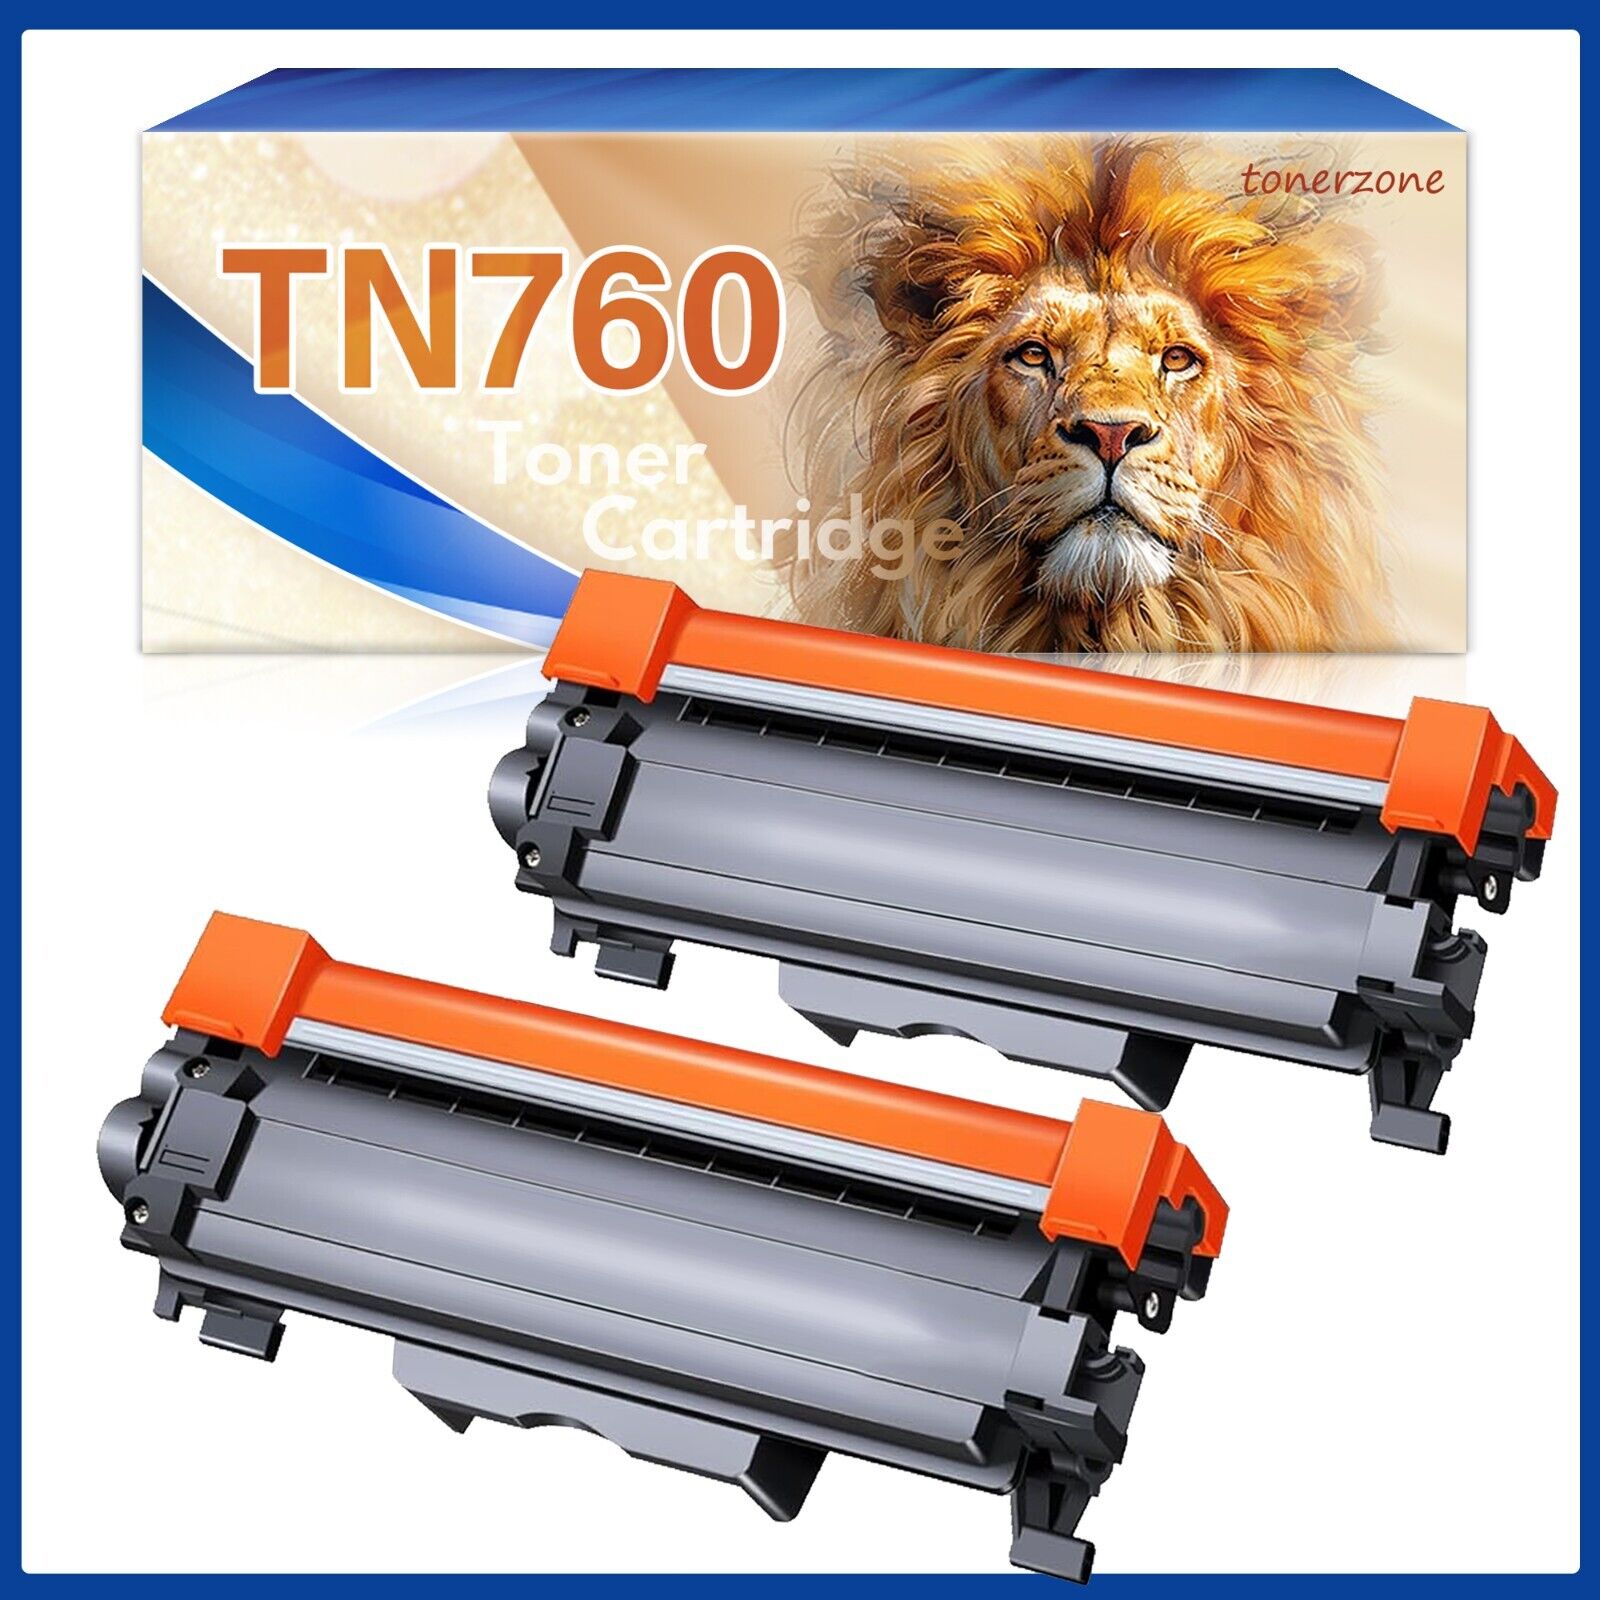 TN760 Toner Cartridge Replacement for Brother DCP-L250DW Printer 2Black